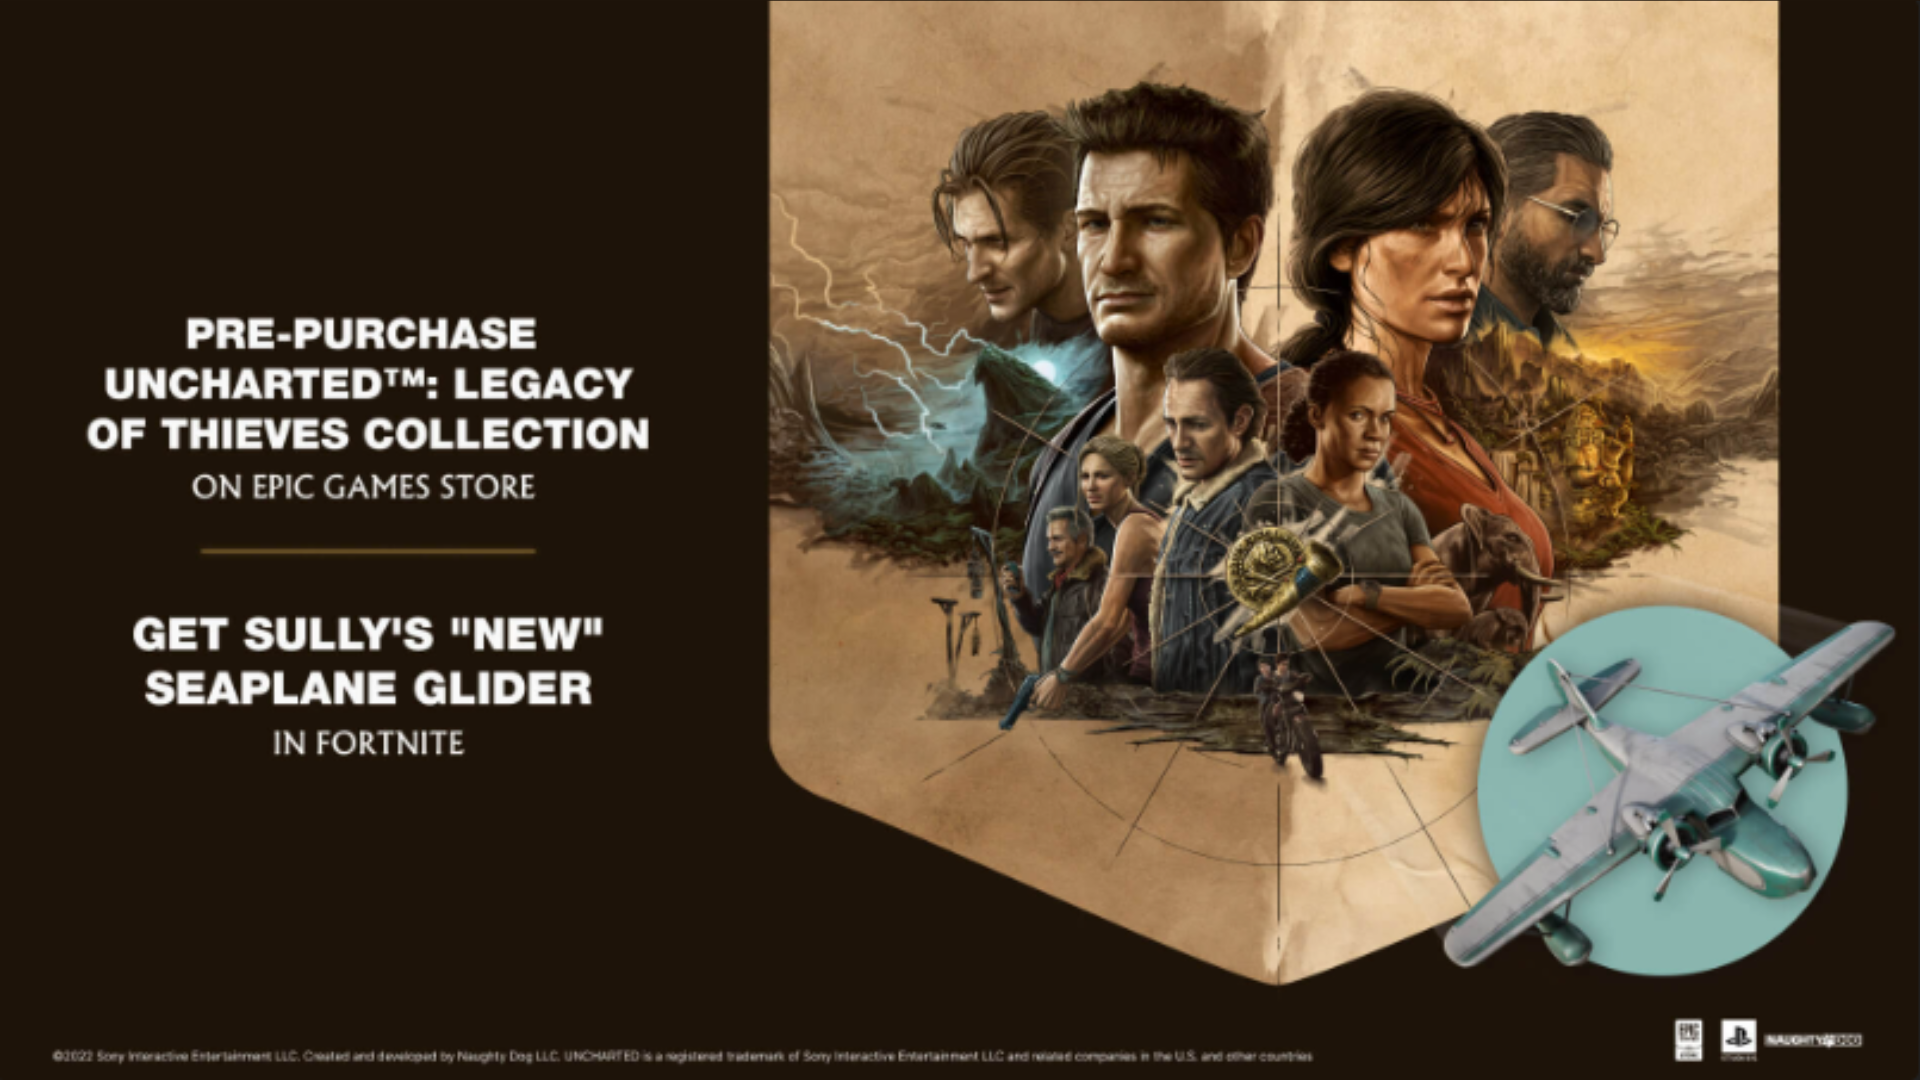 All Sony PlayStation Games coming to PC includes Uncharted + System Requirements - Bonus